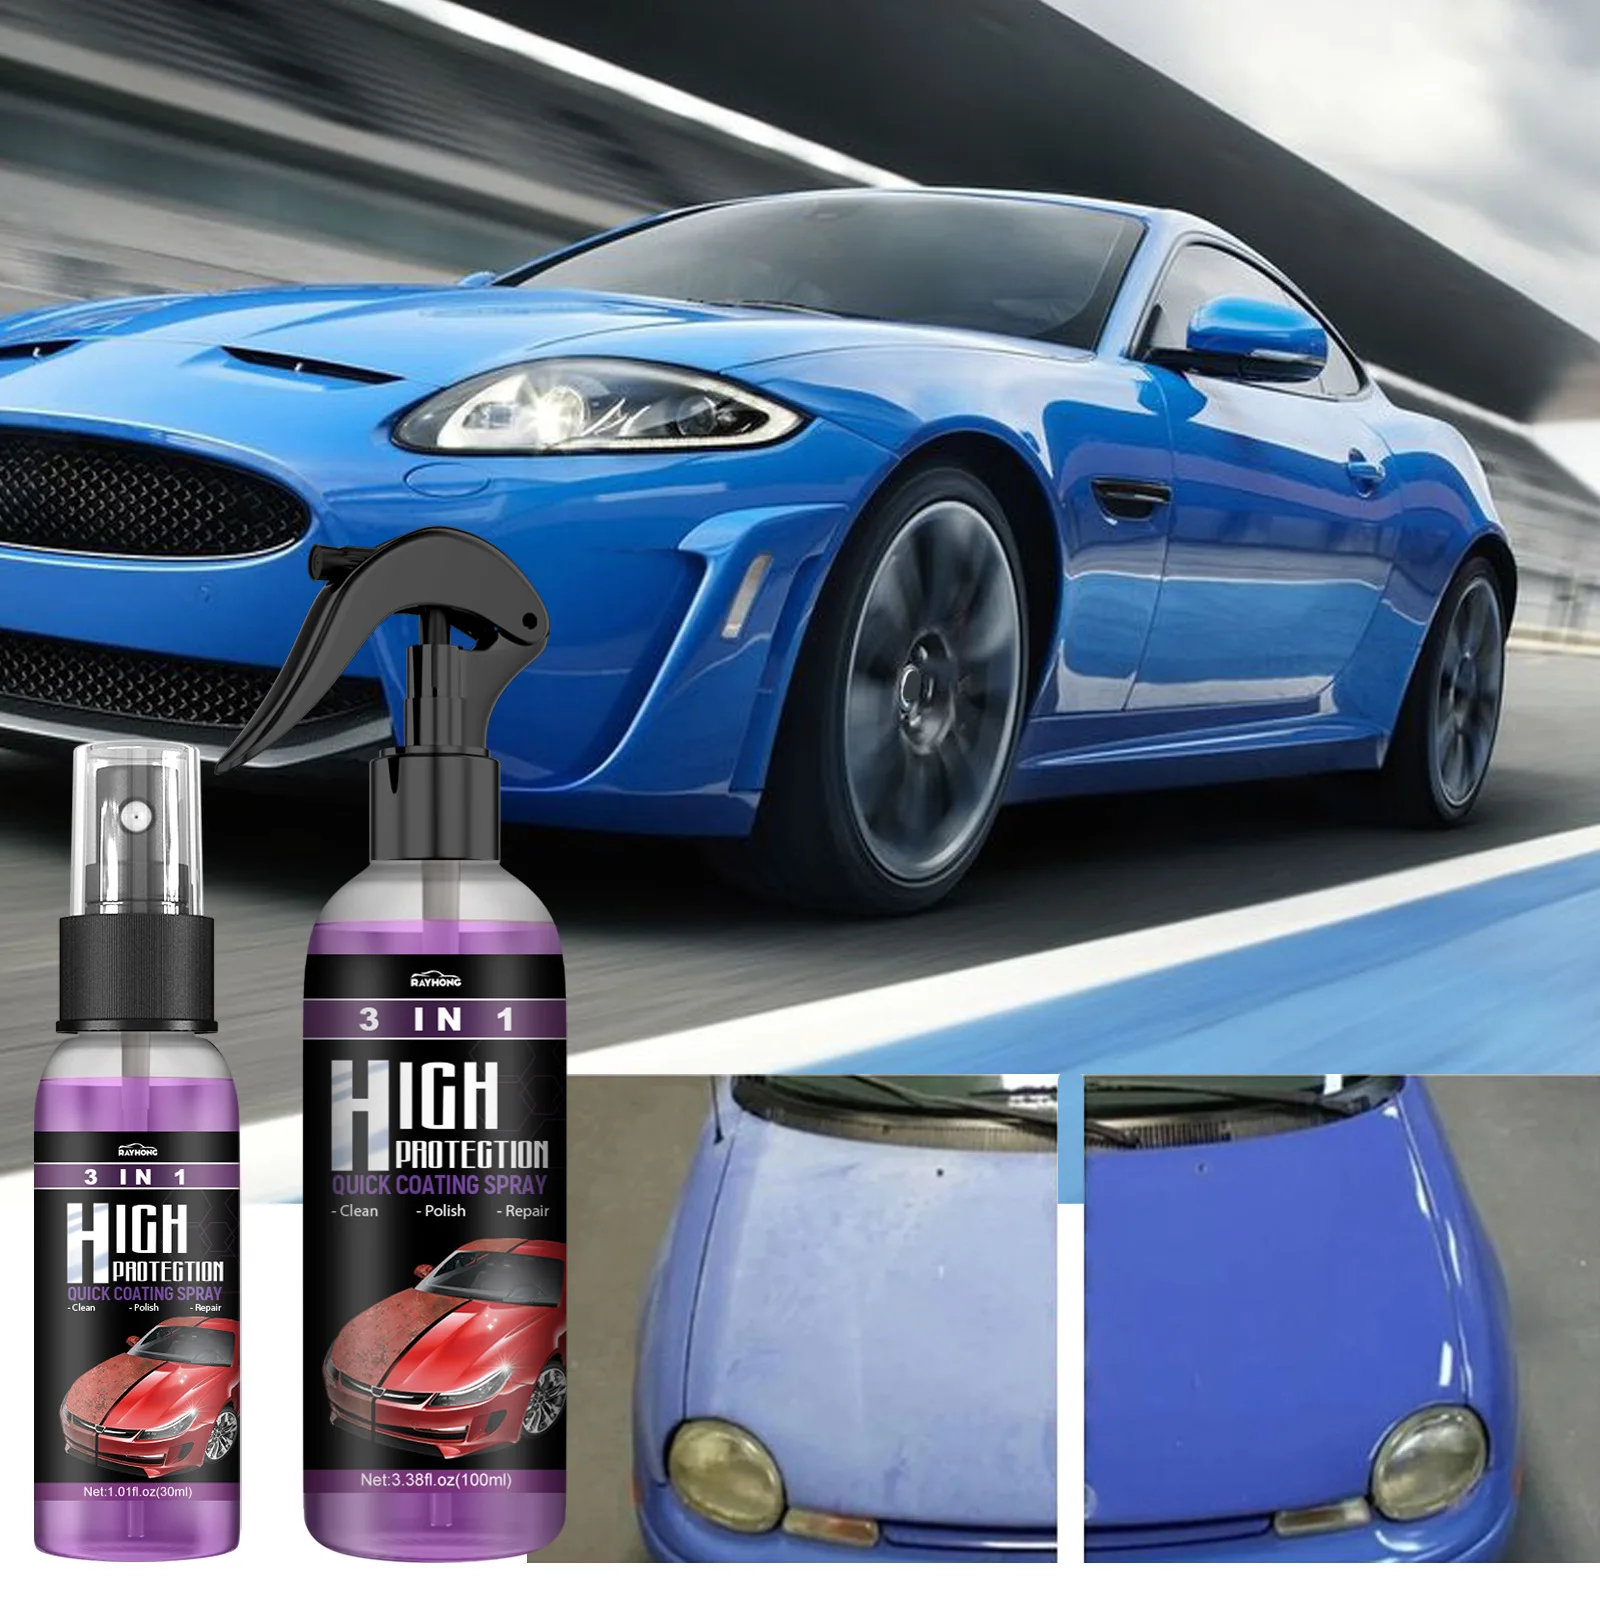  High Protection 3 in 1 Spray, 3 in 1 High Protection Quick Car  Coating Spray, Car Scratch Nano Repair Spray, Fast fine Scratch Repair, Car  Wax Polish Spray for Cars Car